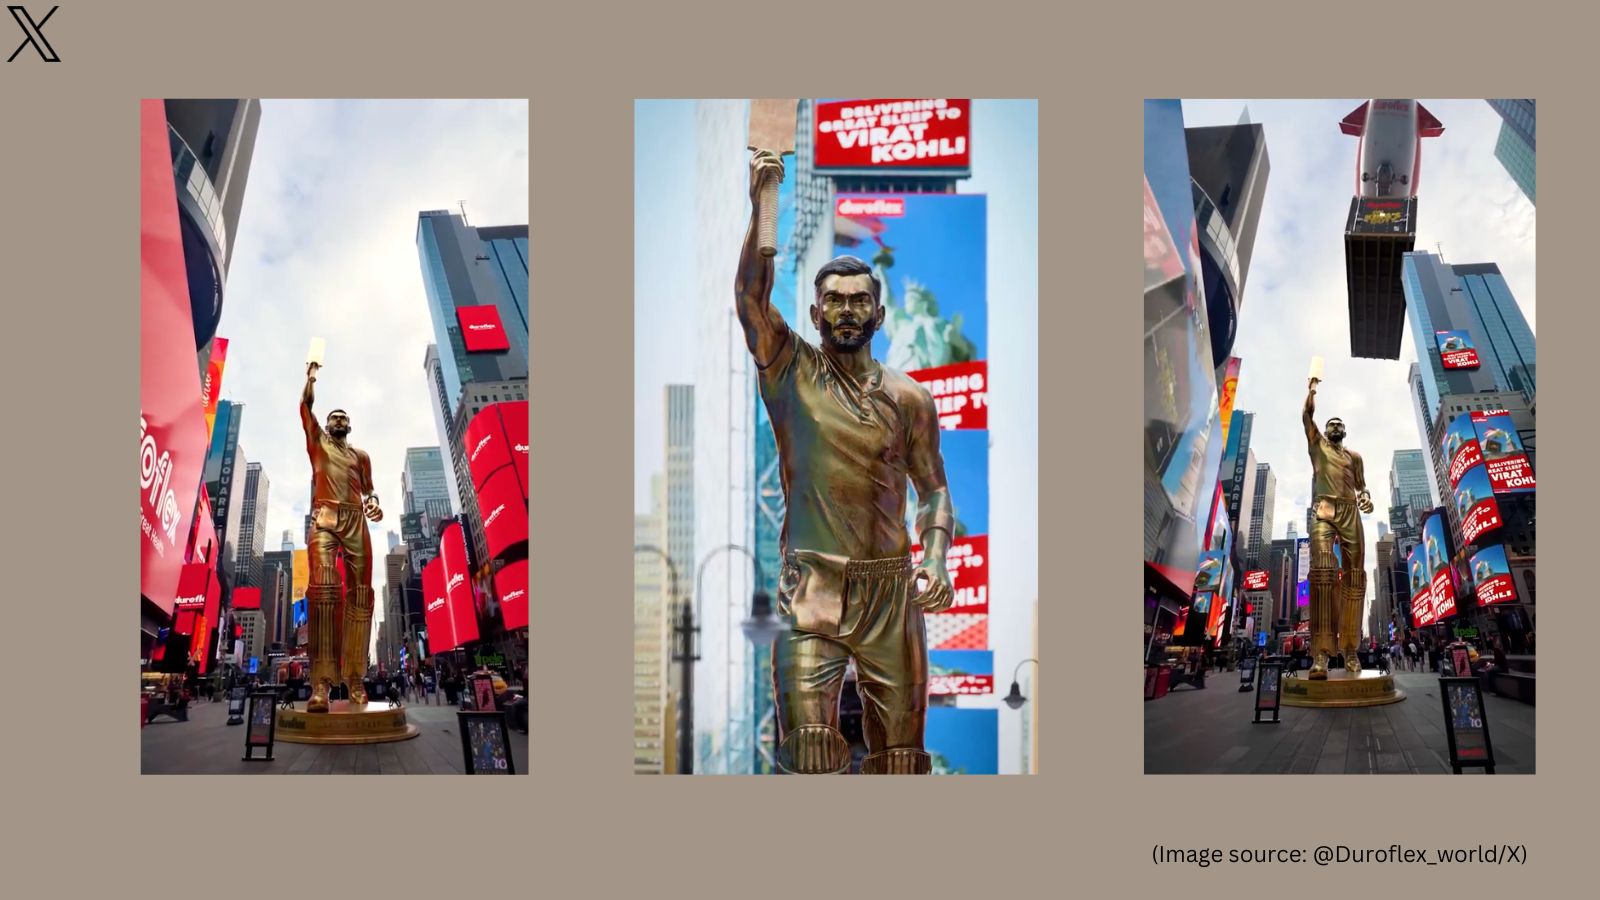 Viral video shows Virat Kohli’s life-size statue at New York’s Times Square, fans react: ‘God of cricket’ - The Indian Express